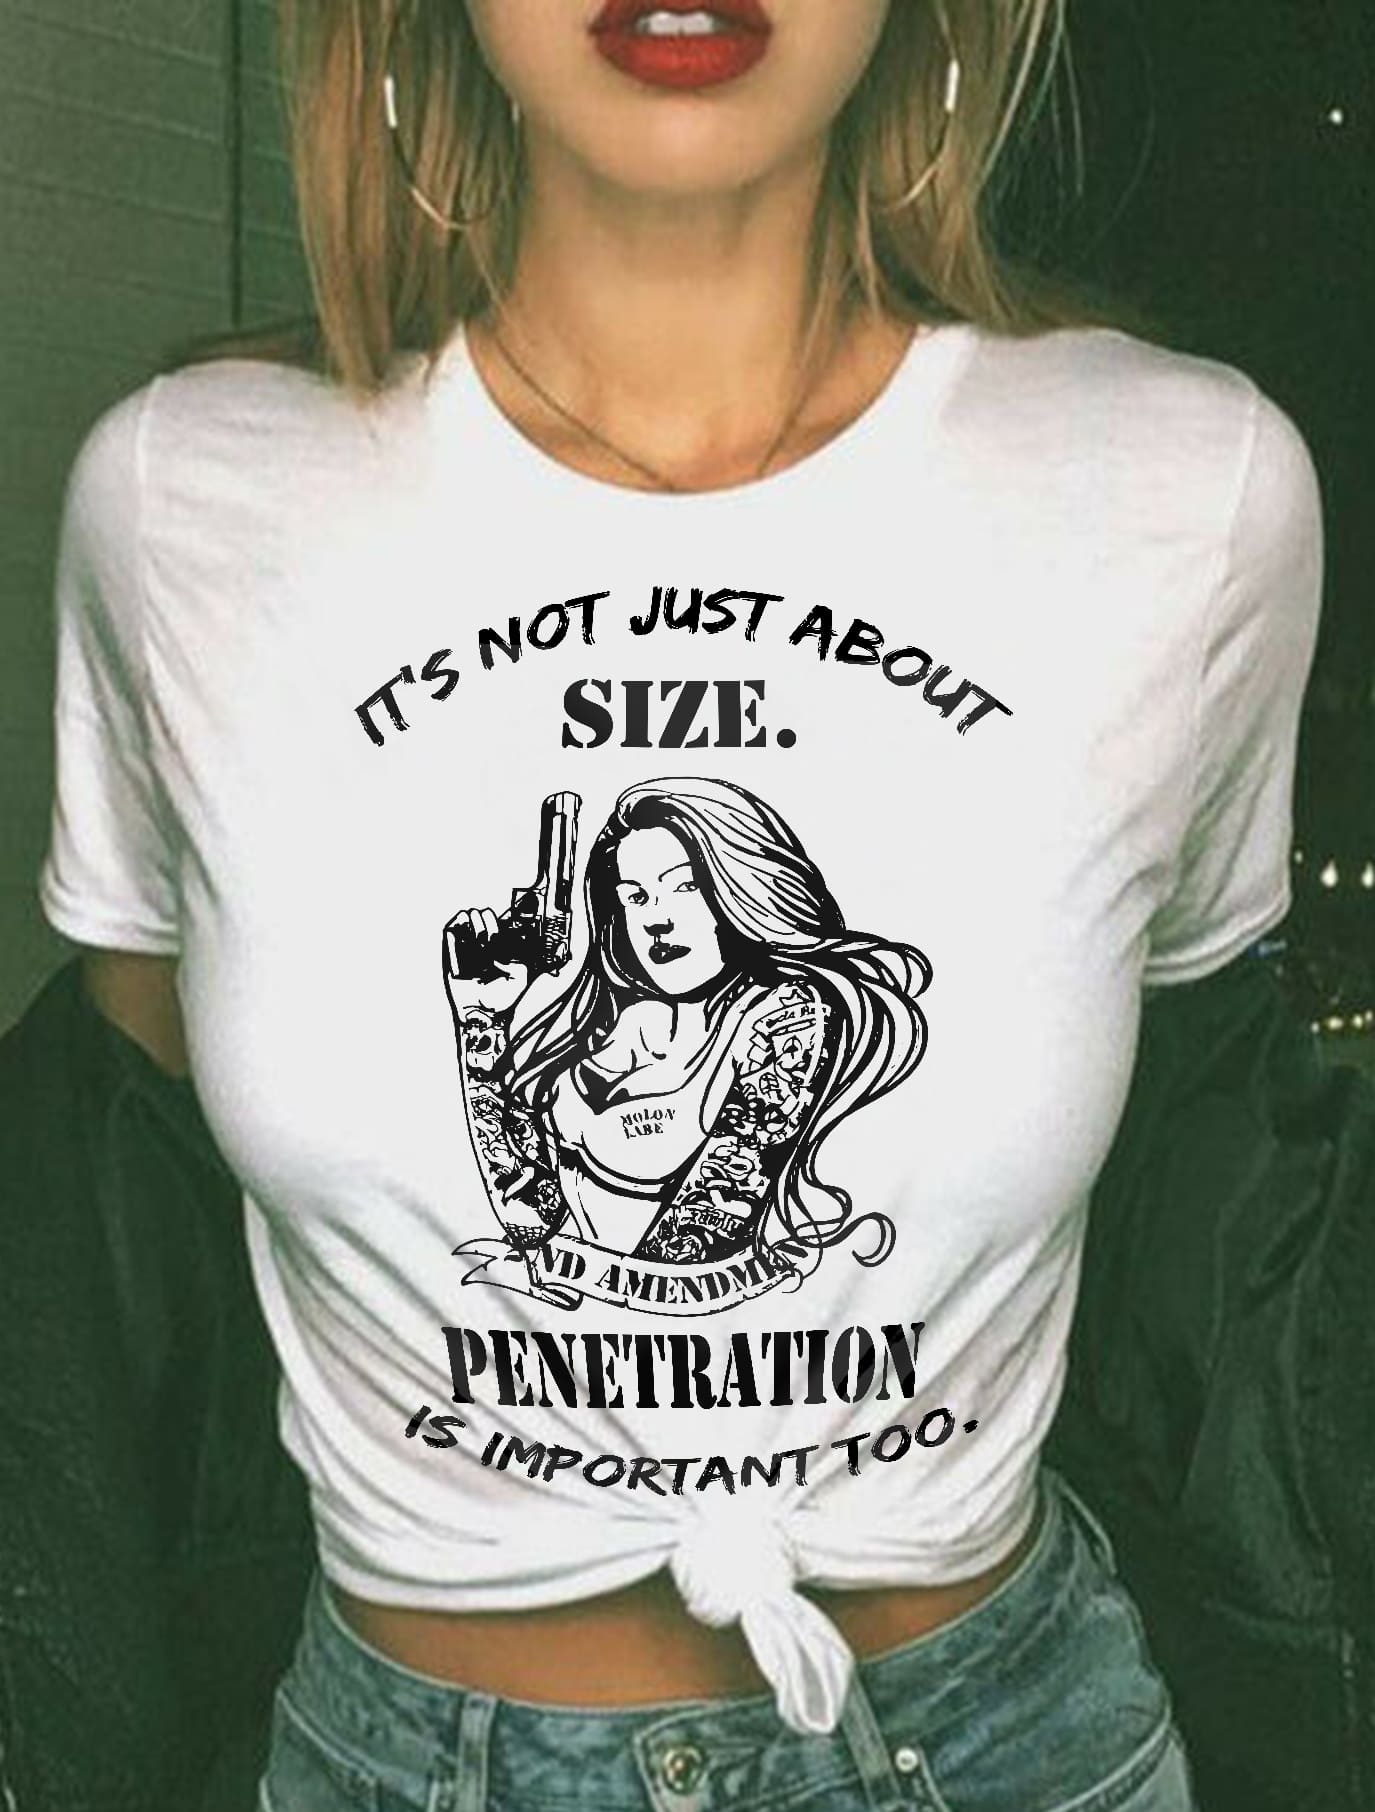 It's not about size and amendment, penetration is important too - Girl with tattoos, gift for tattooed person